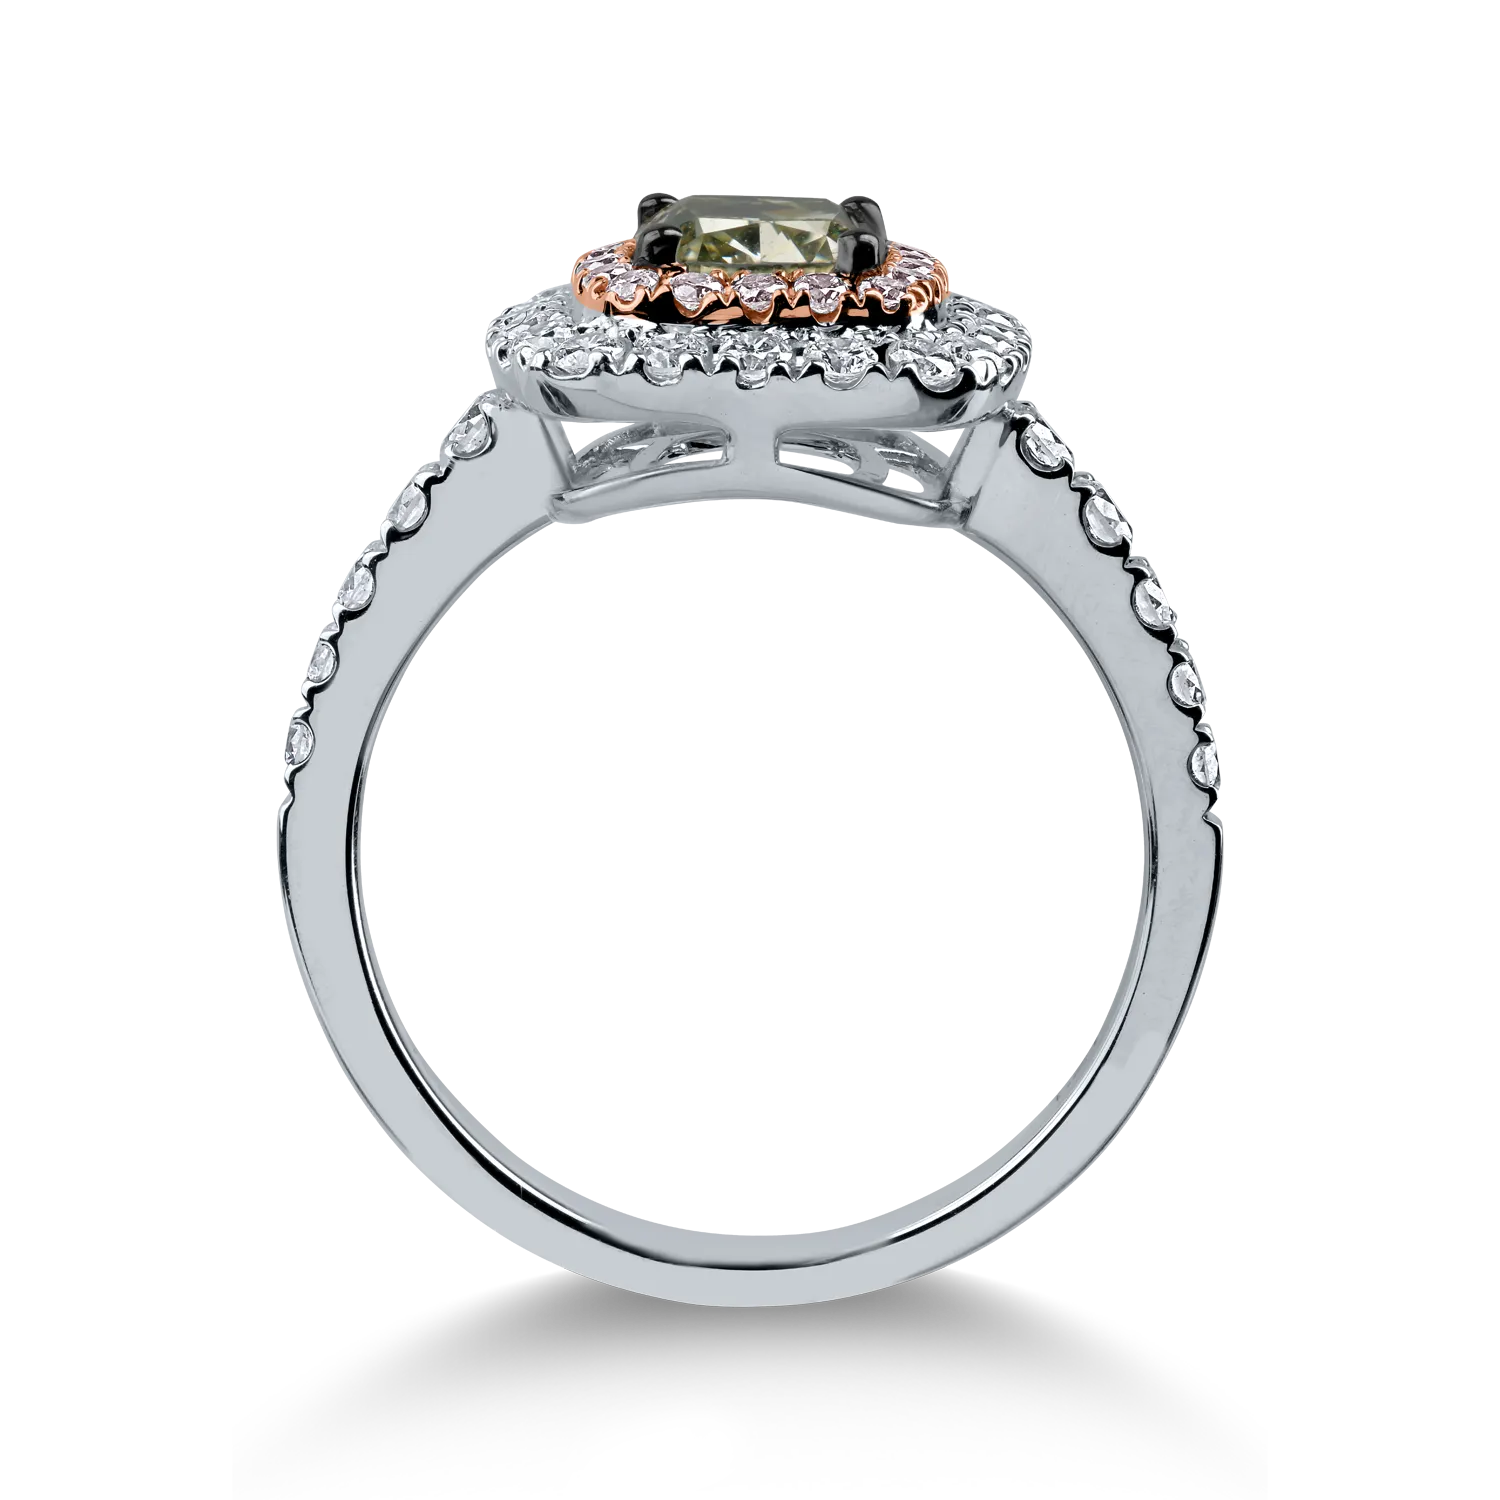 White gold ring with 2ct diamonds